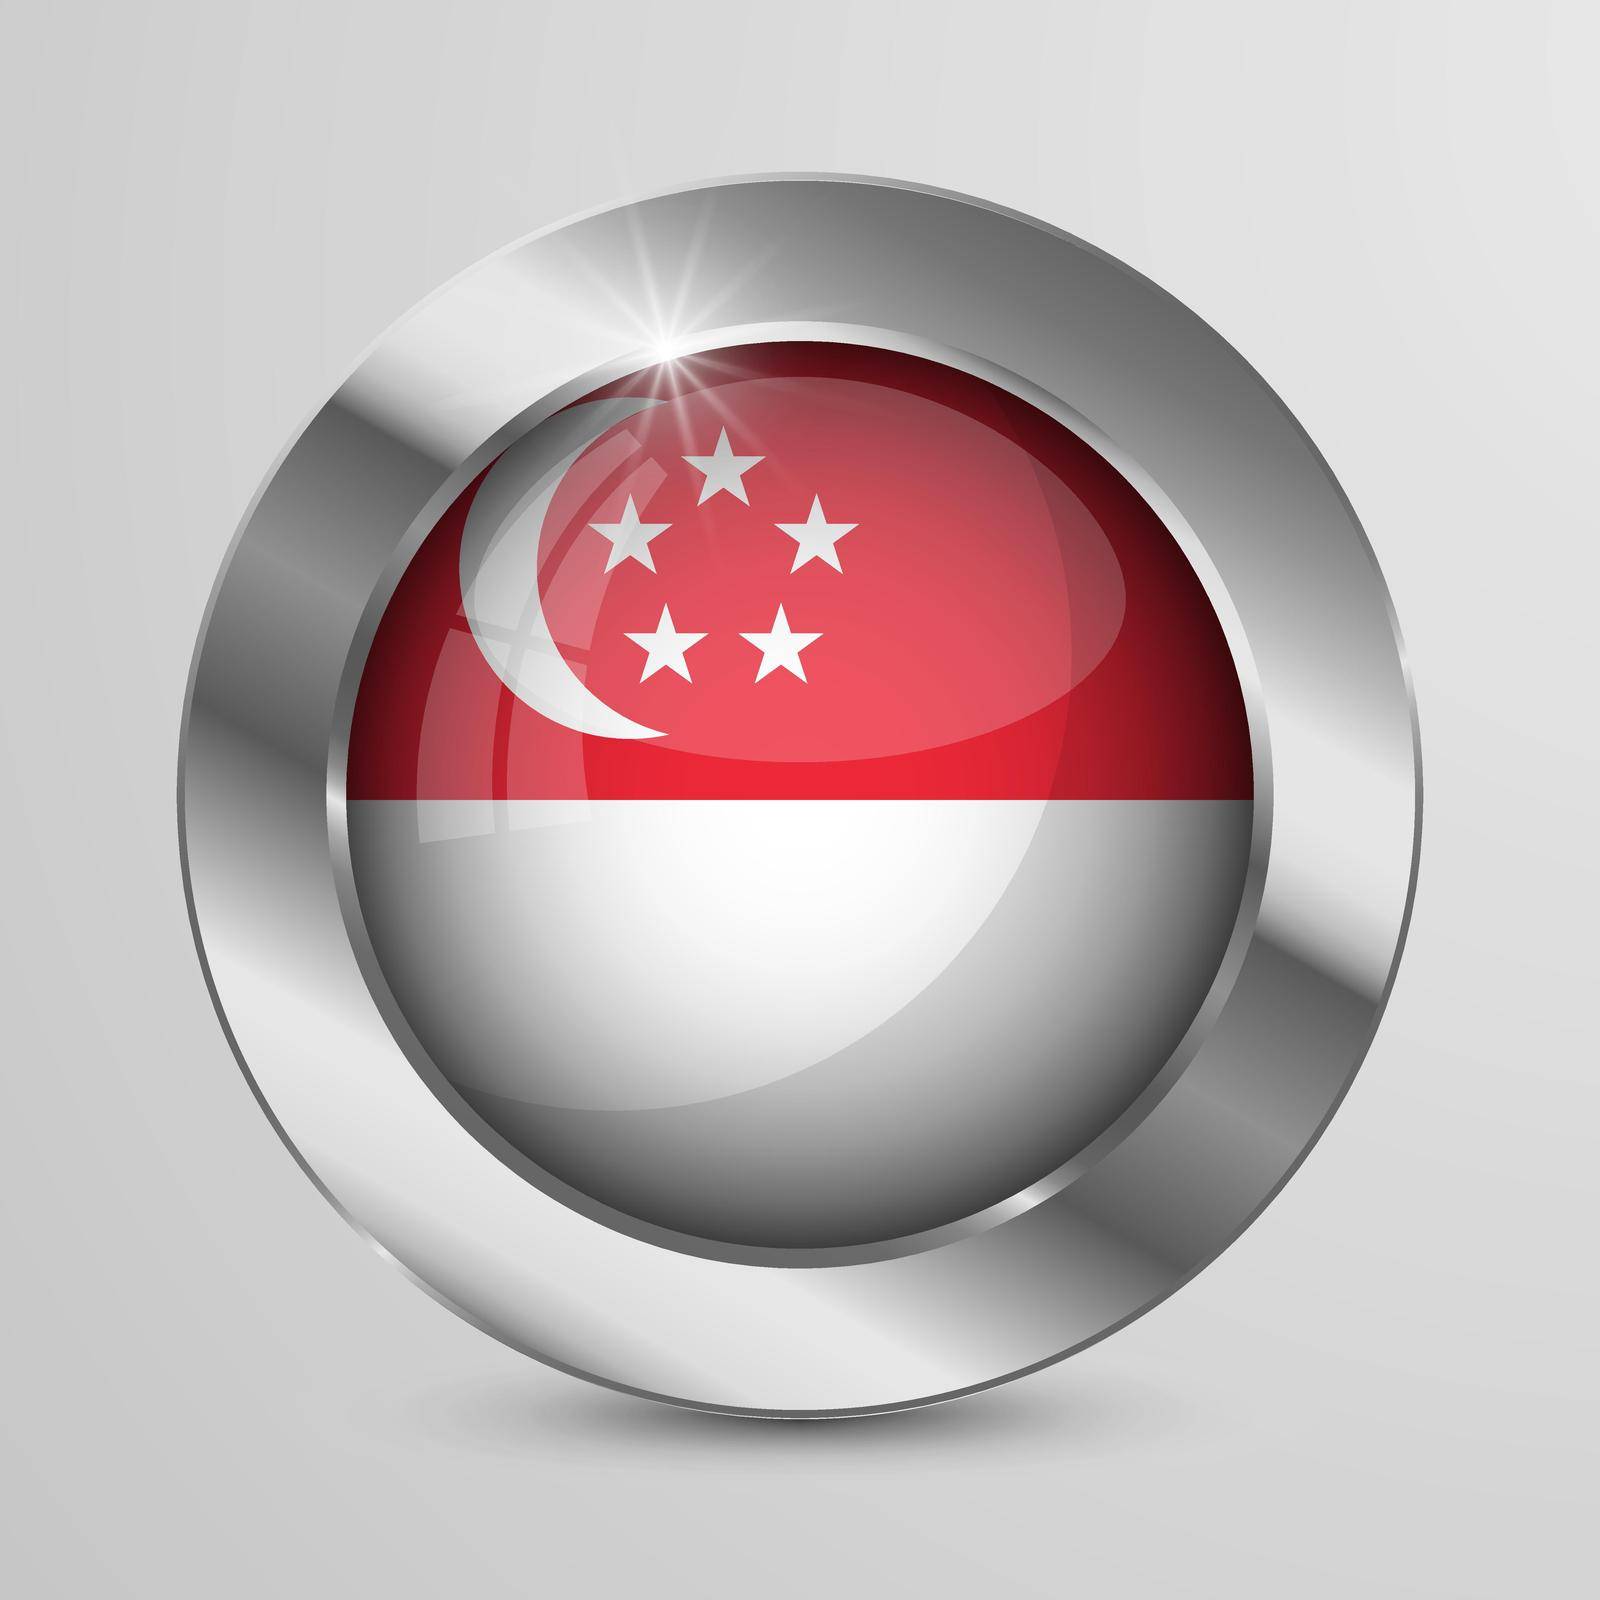 EPS10 Vector Patriotic Button with Singapore flag colors. An element of impact for the use you want to make of it.